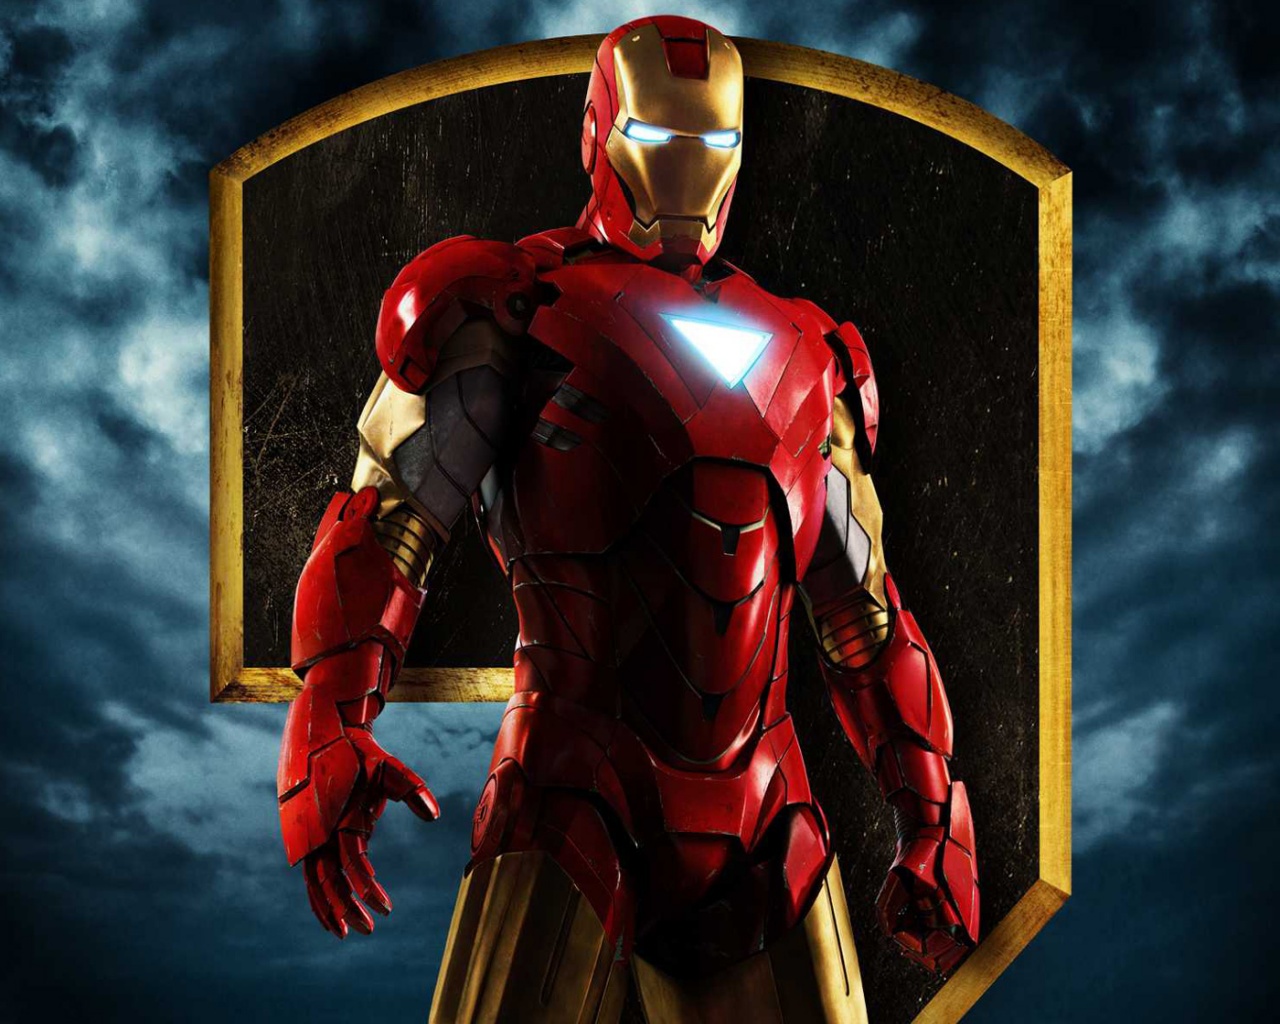 IRON MAN 3 NEW HD WALLPAPERS 2013:Image to Wallpaper